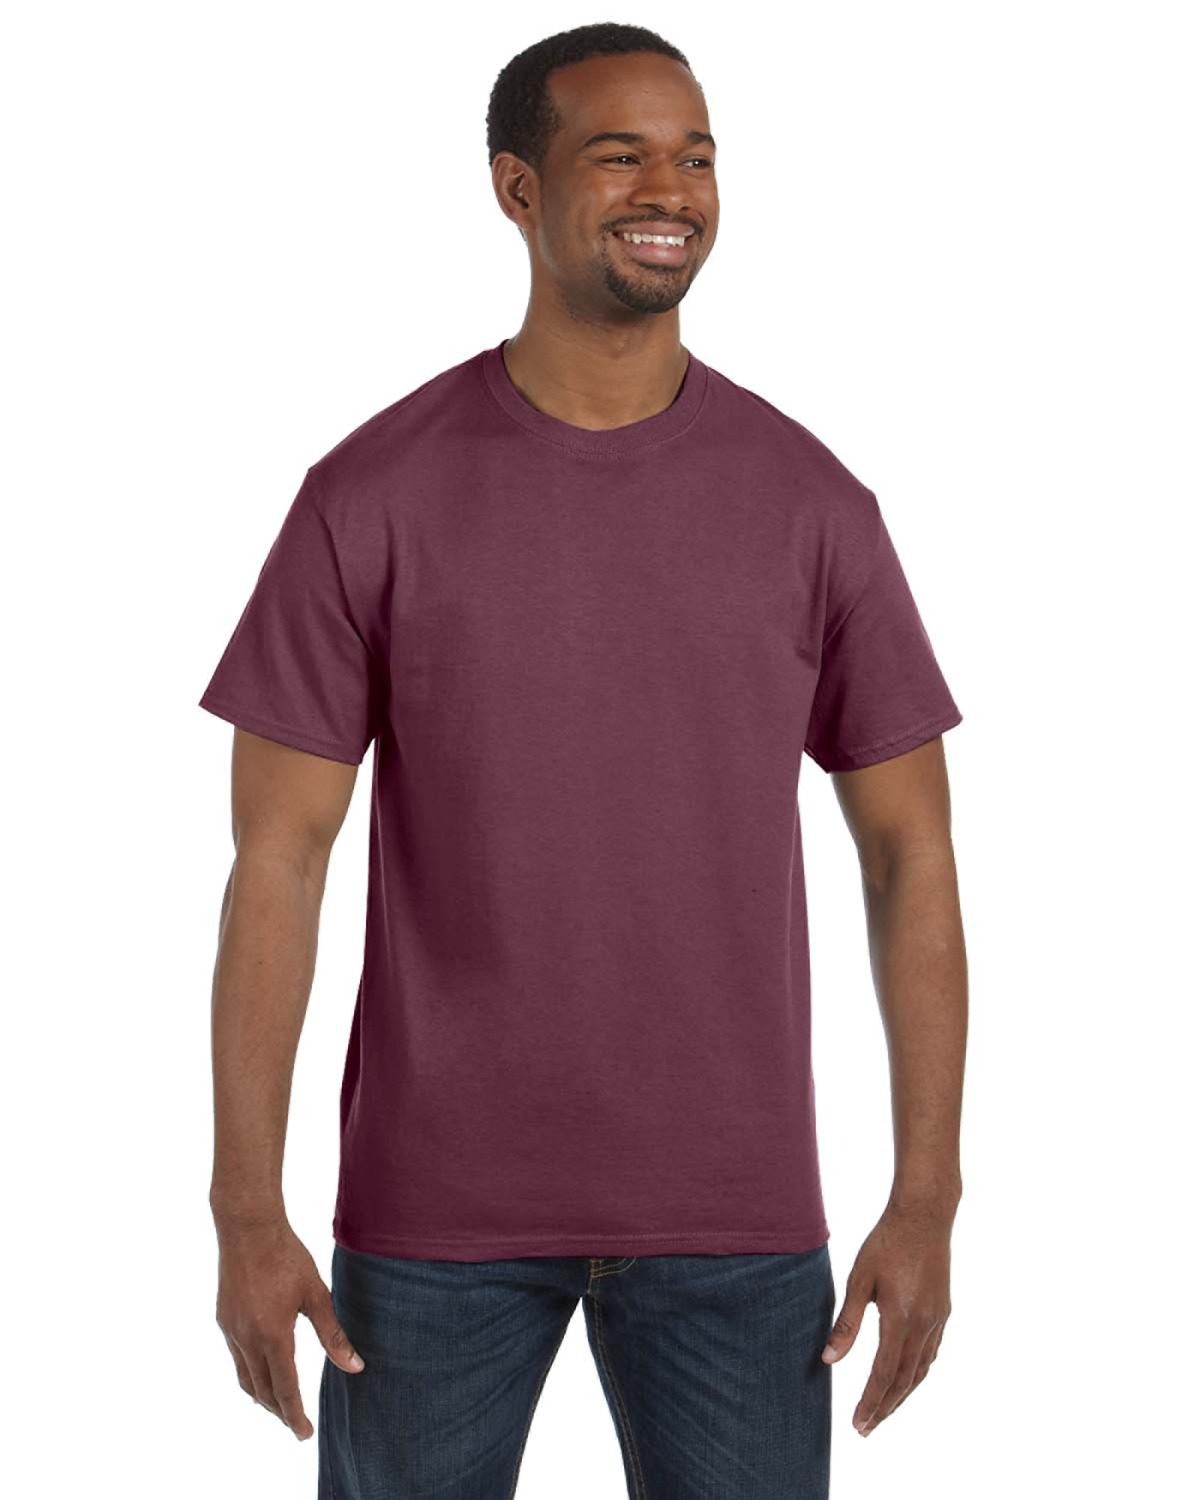 click to view Vint Hth Maroon